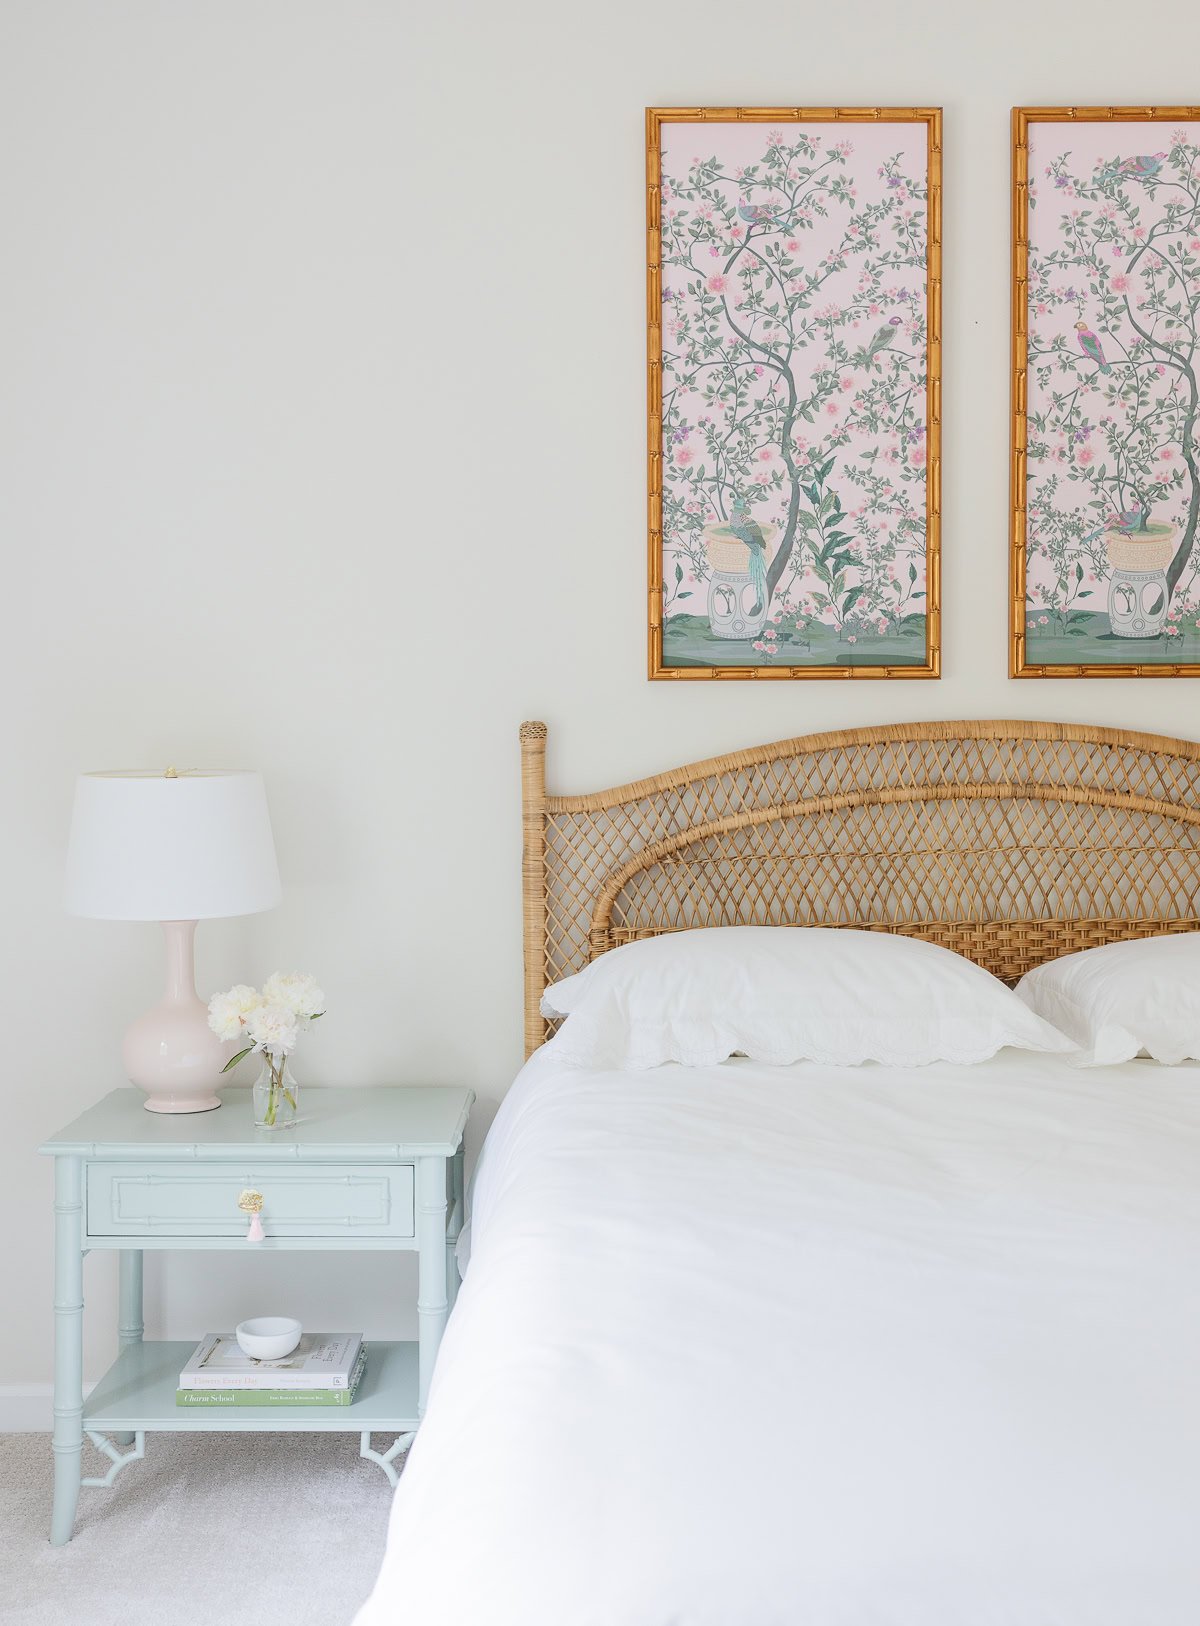 A bedroom features a rattan bed frame with walls painted in a Benjamin Moore White Color, a light blue nightstand with a lamp and flowers, and two framed botanical artworks on the wall.